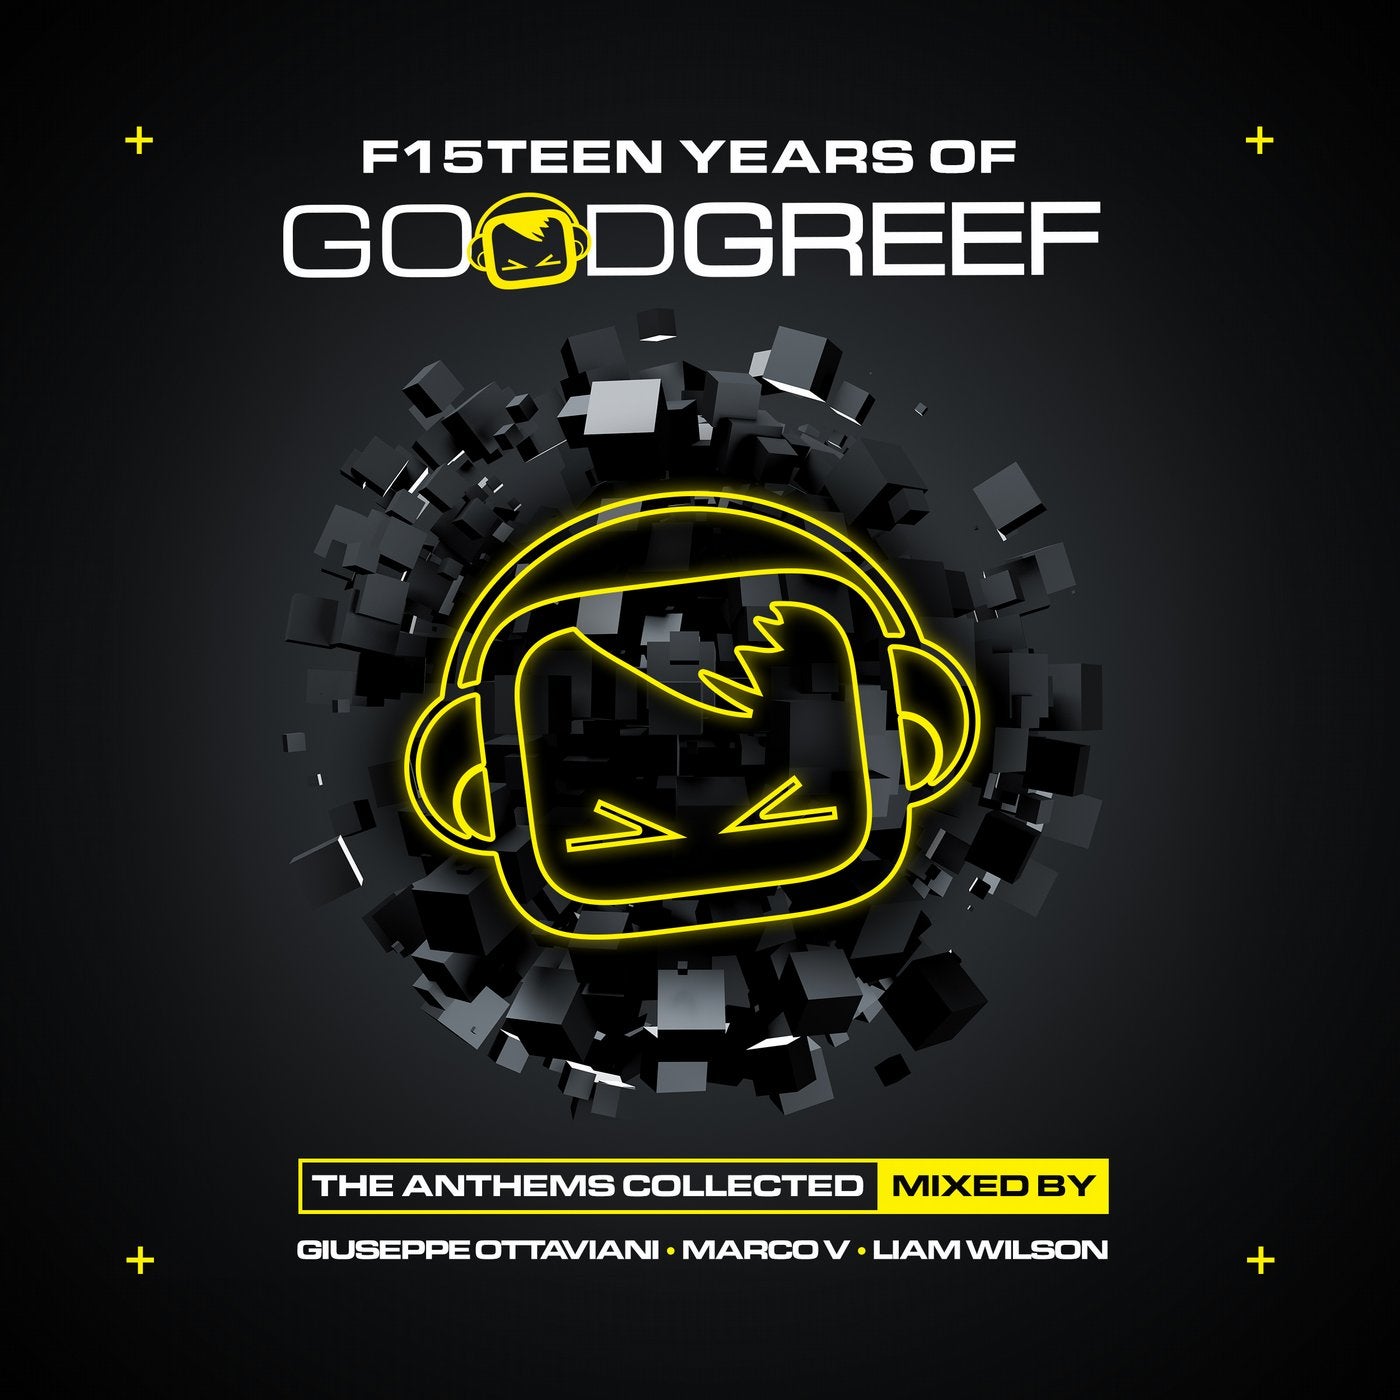 F15teen Years of Goodgreef - The Anthems Collected